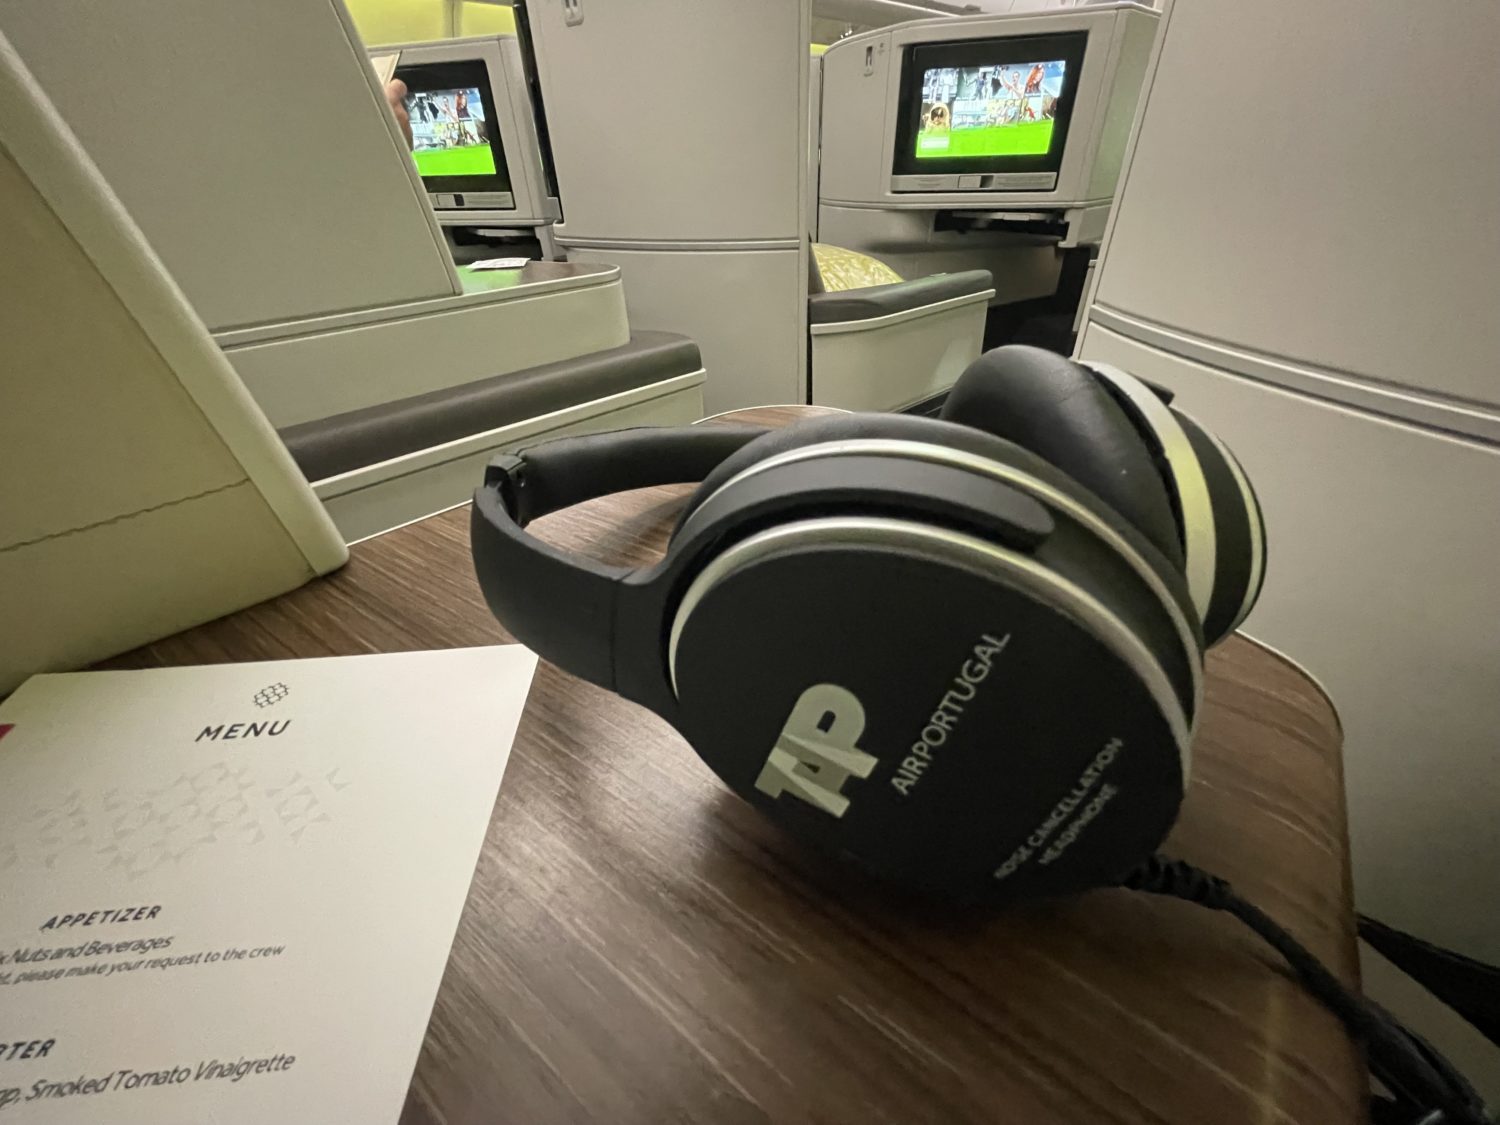 TAP business class headphones and table